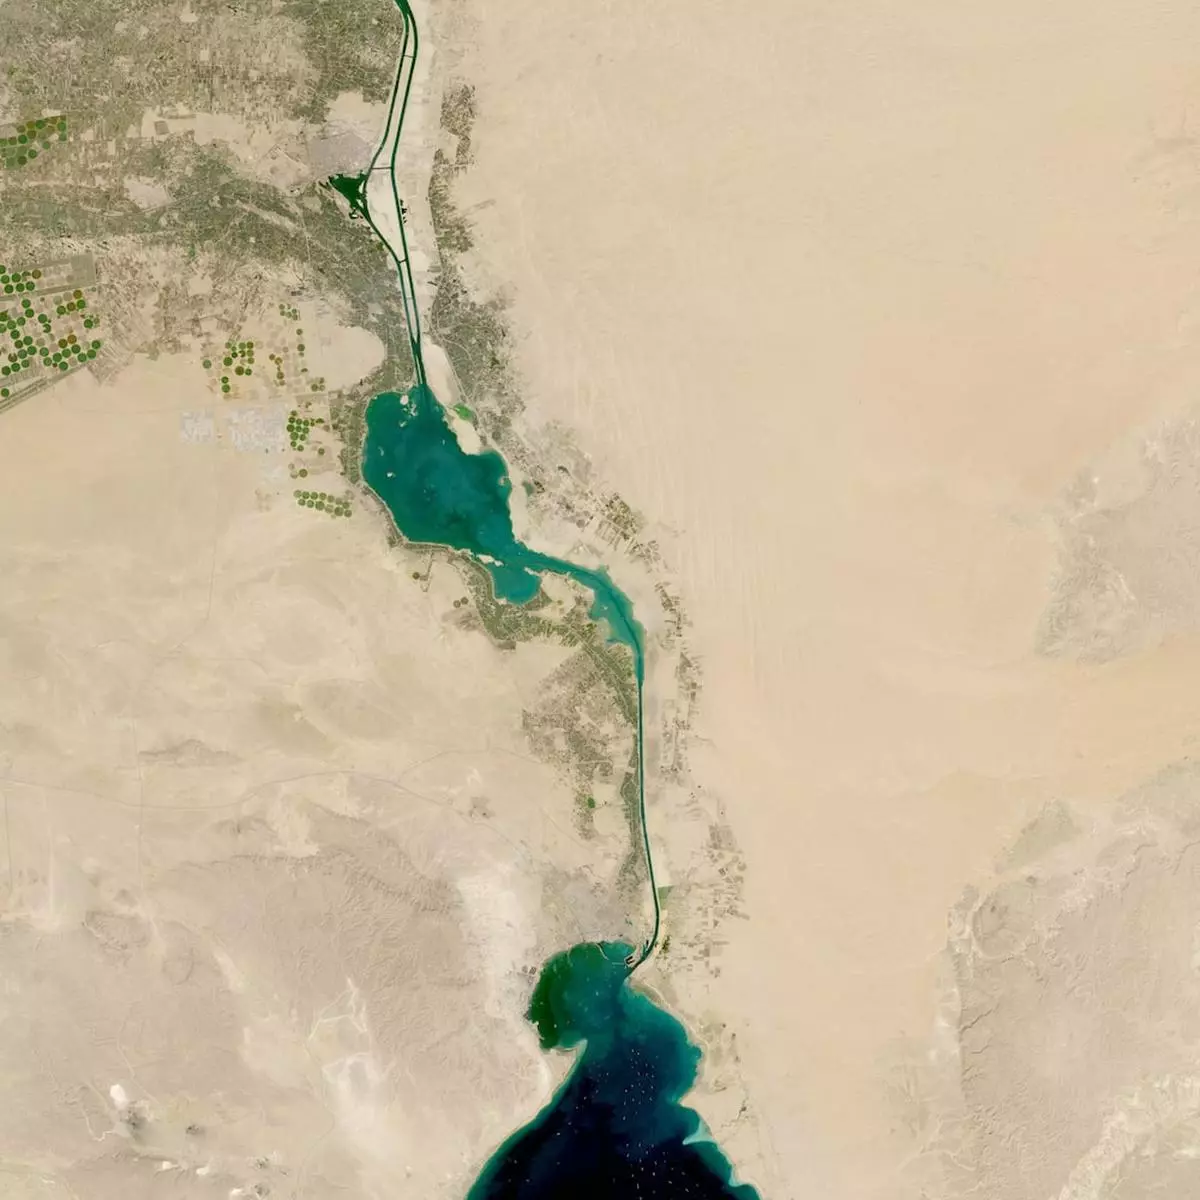 True colour composites of container ships backed up in the Gulf of Suez waiting for passage through the Suez Canal on April 3, 2021